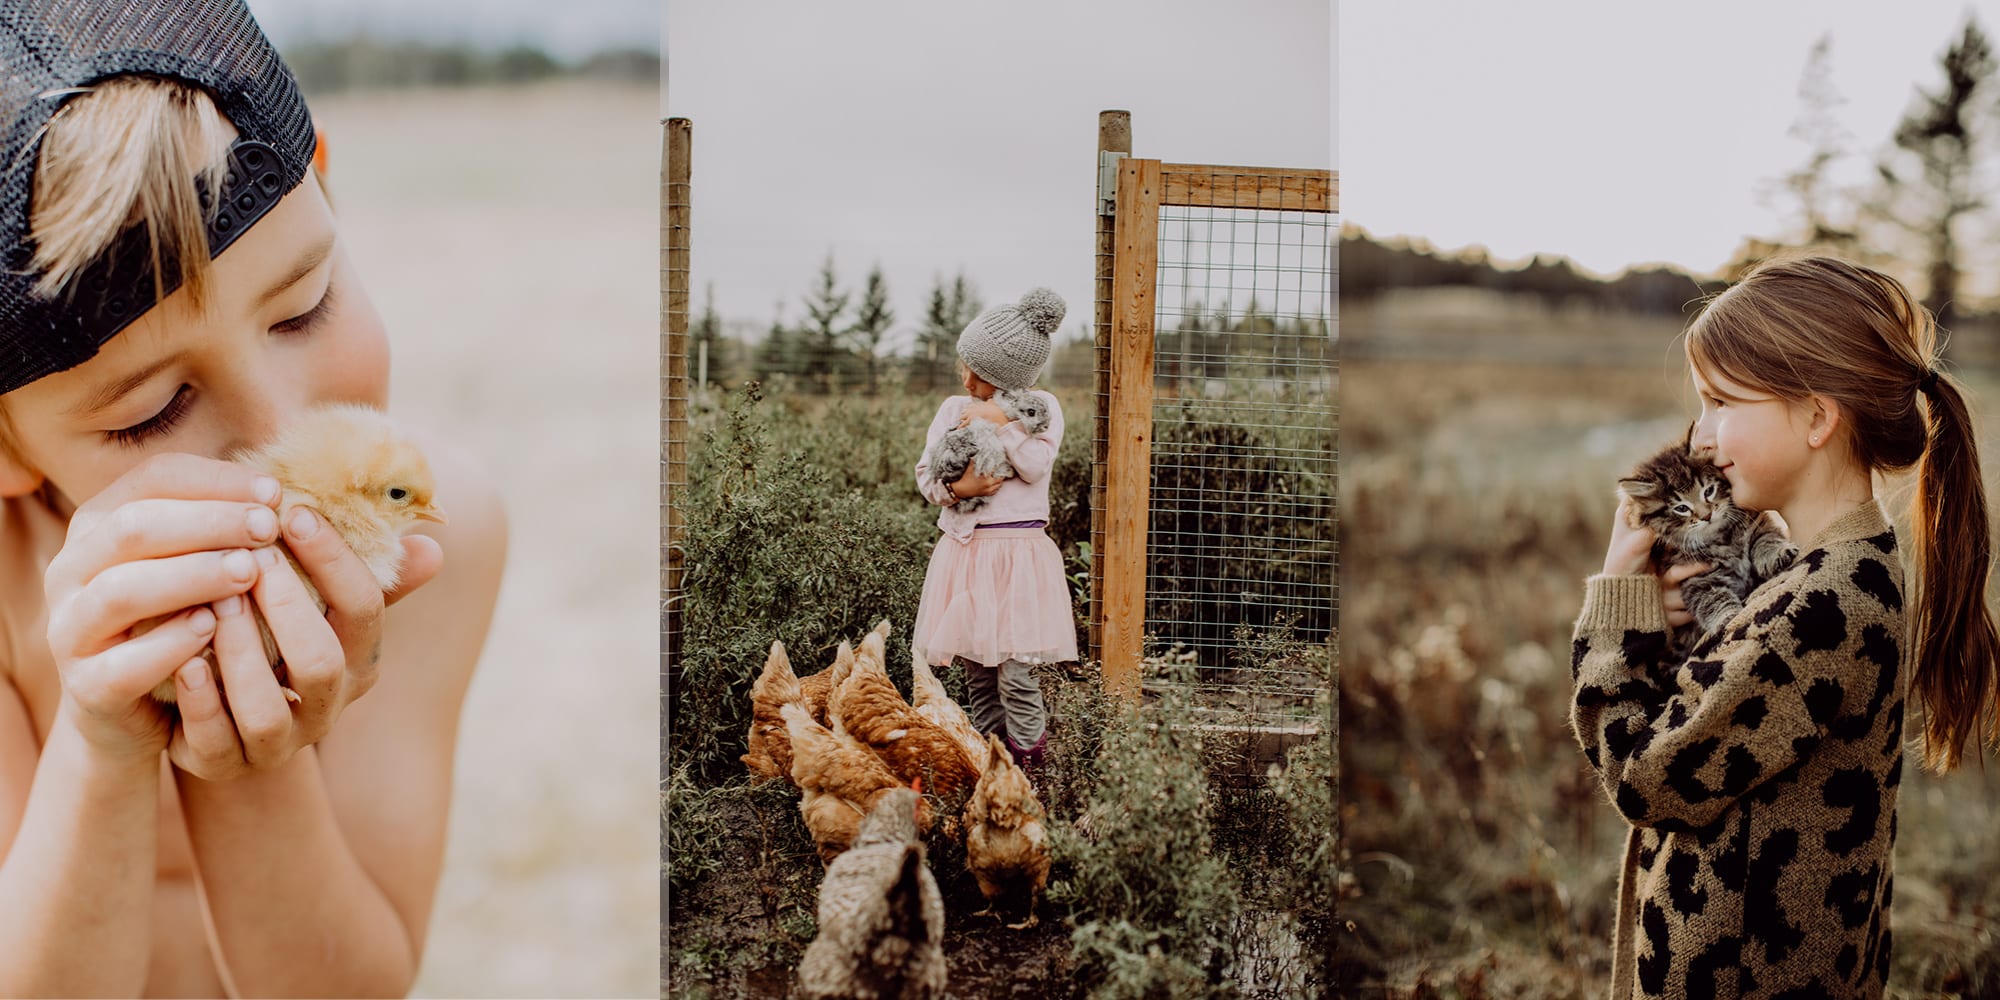 Pictures of children with farm animals